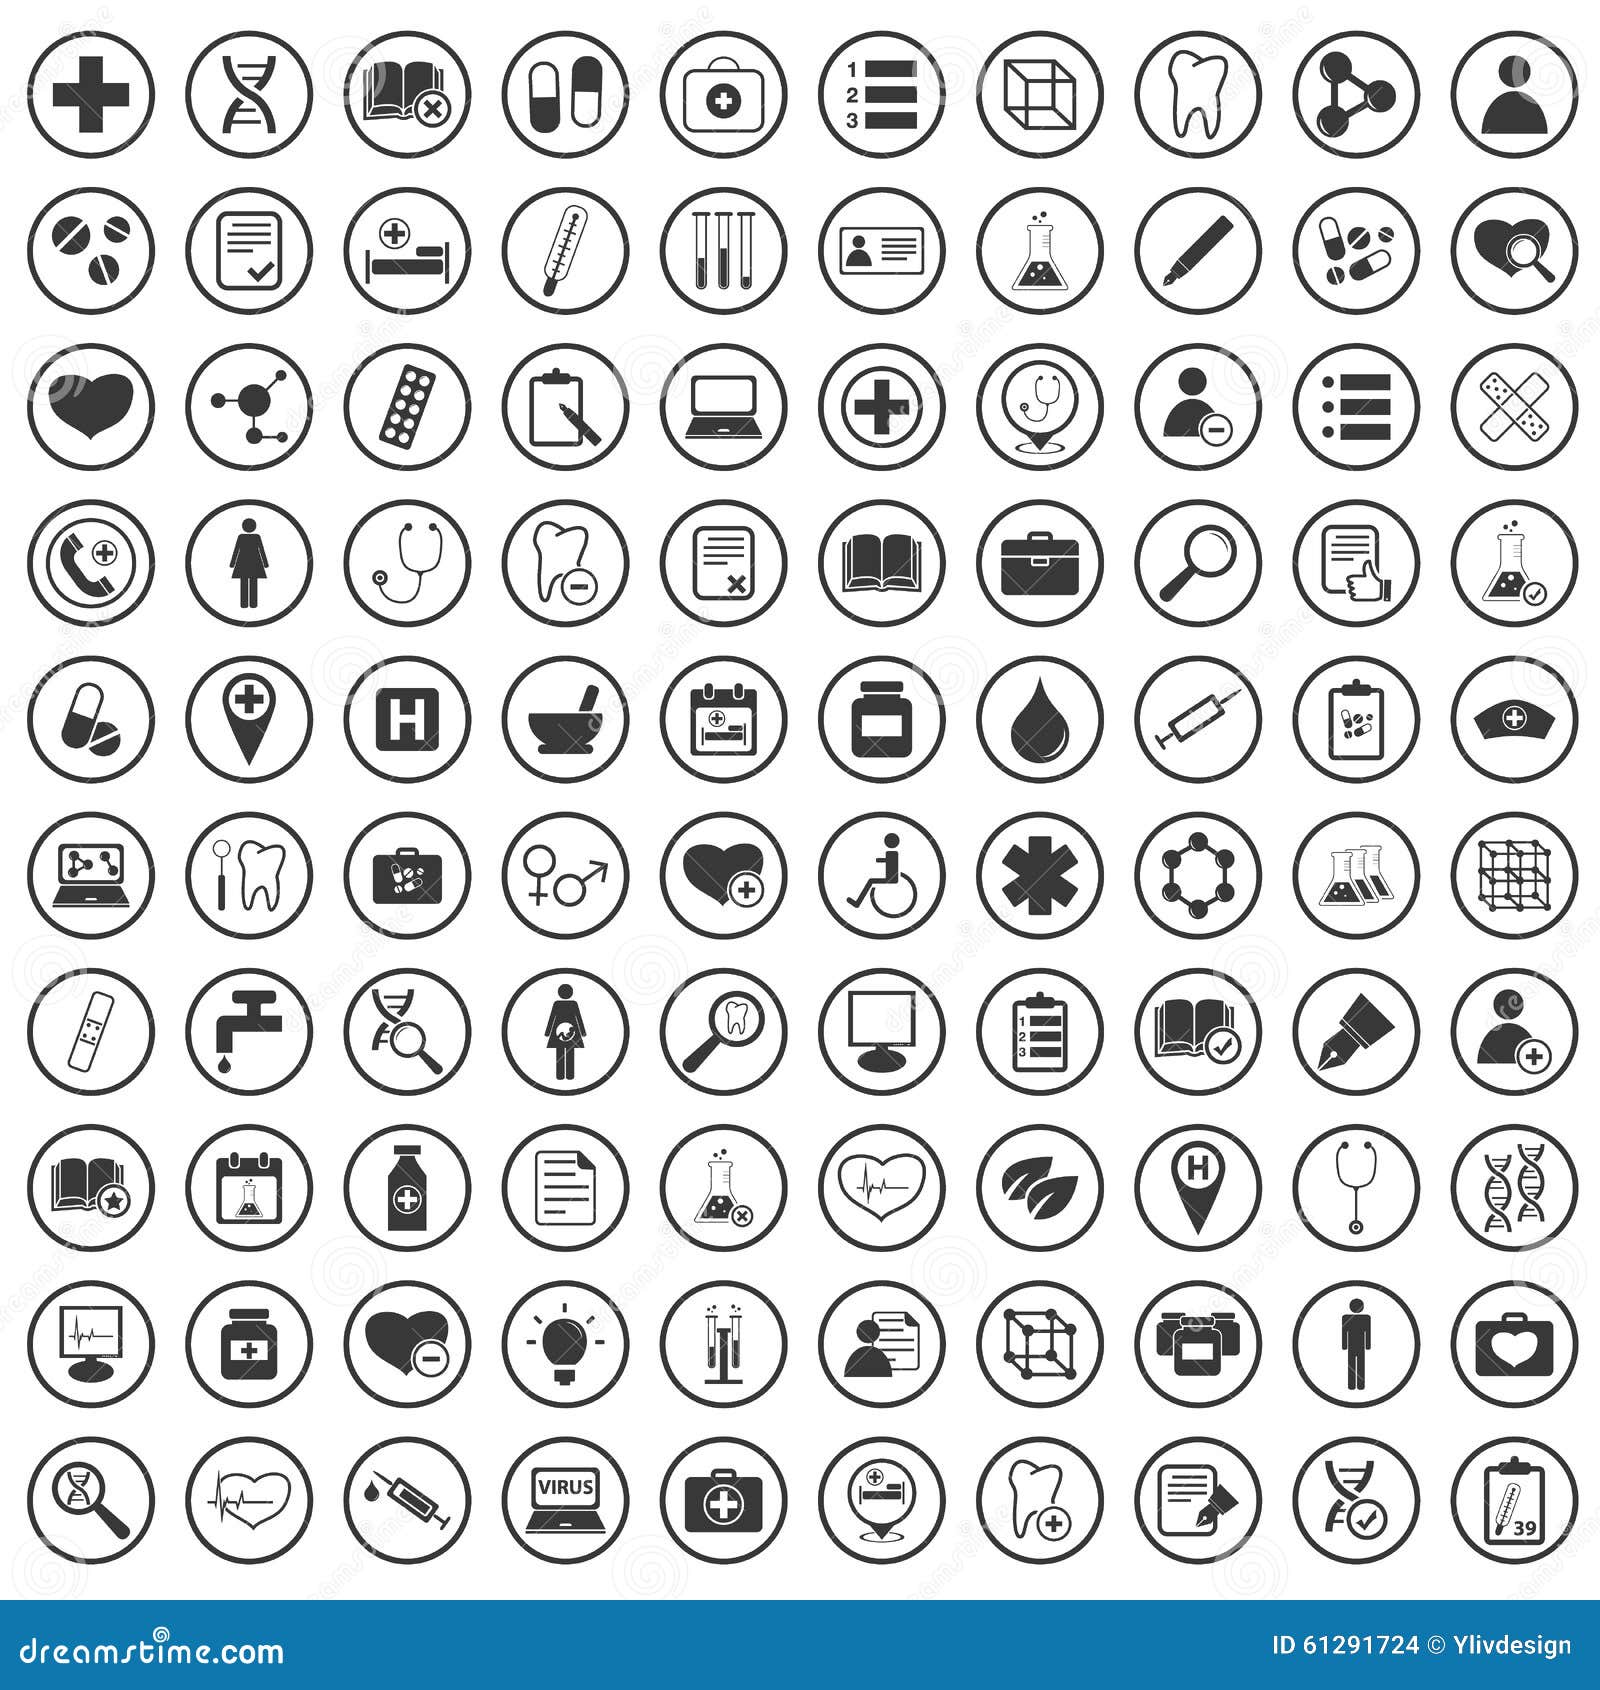 100 medicine icons stock vector. Illustration of pictogram - 61291724